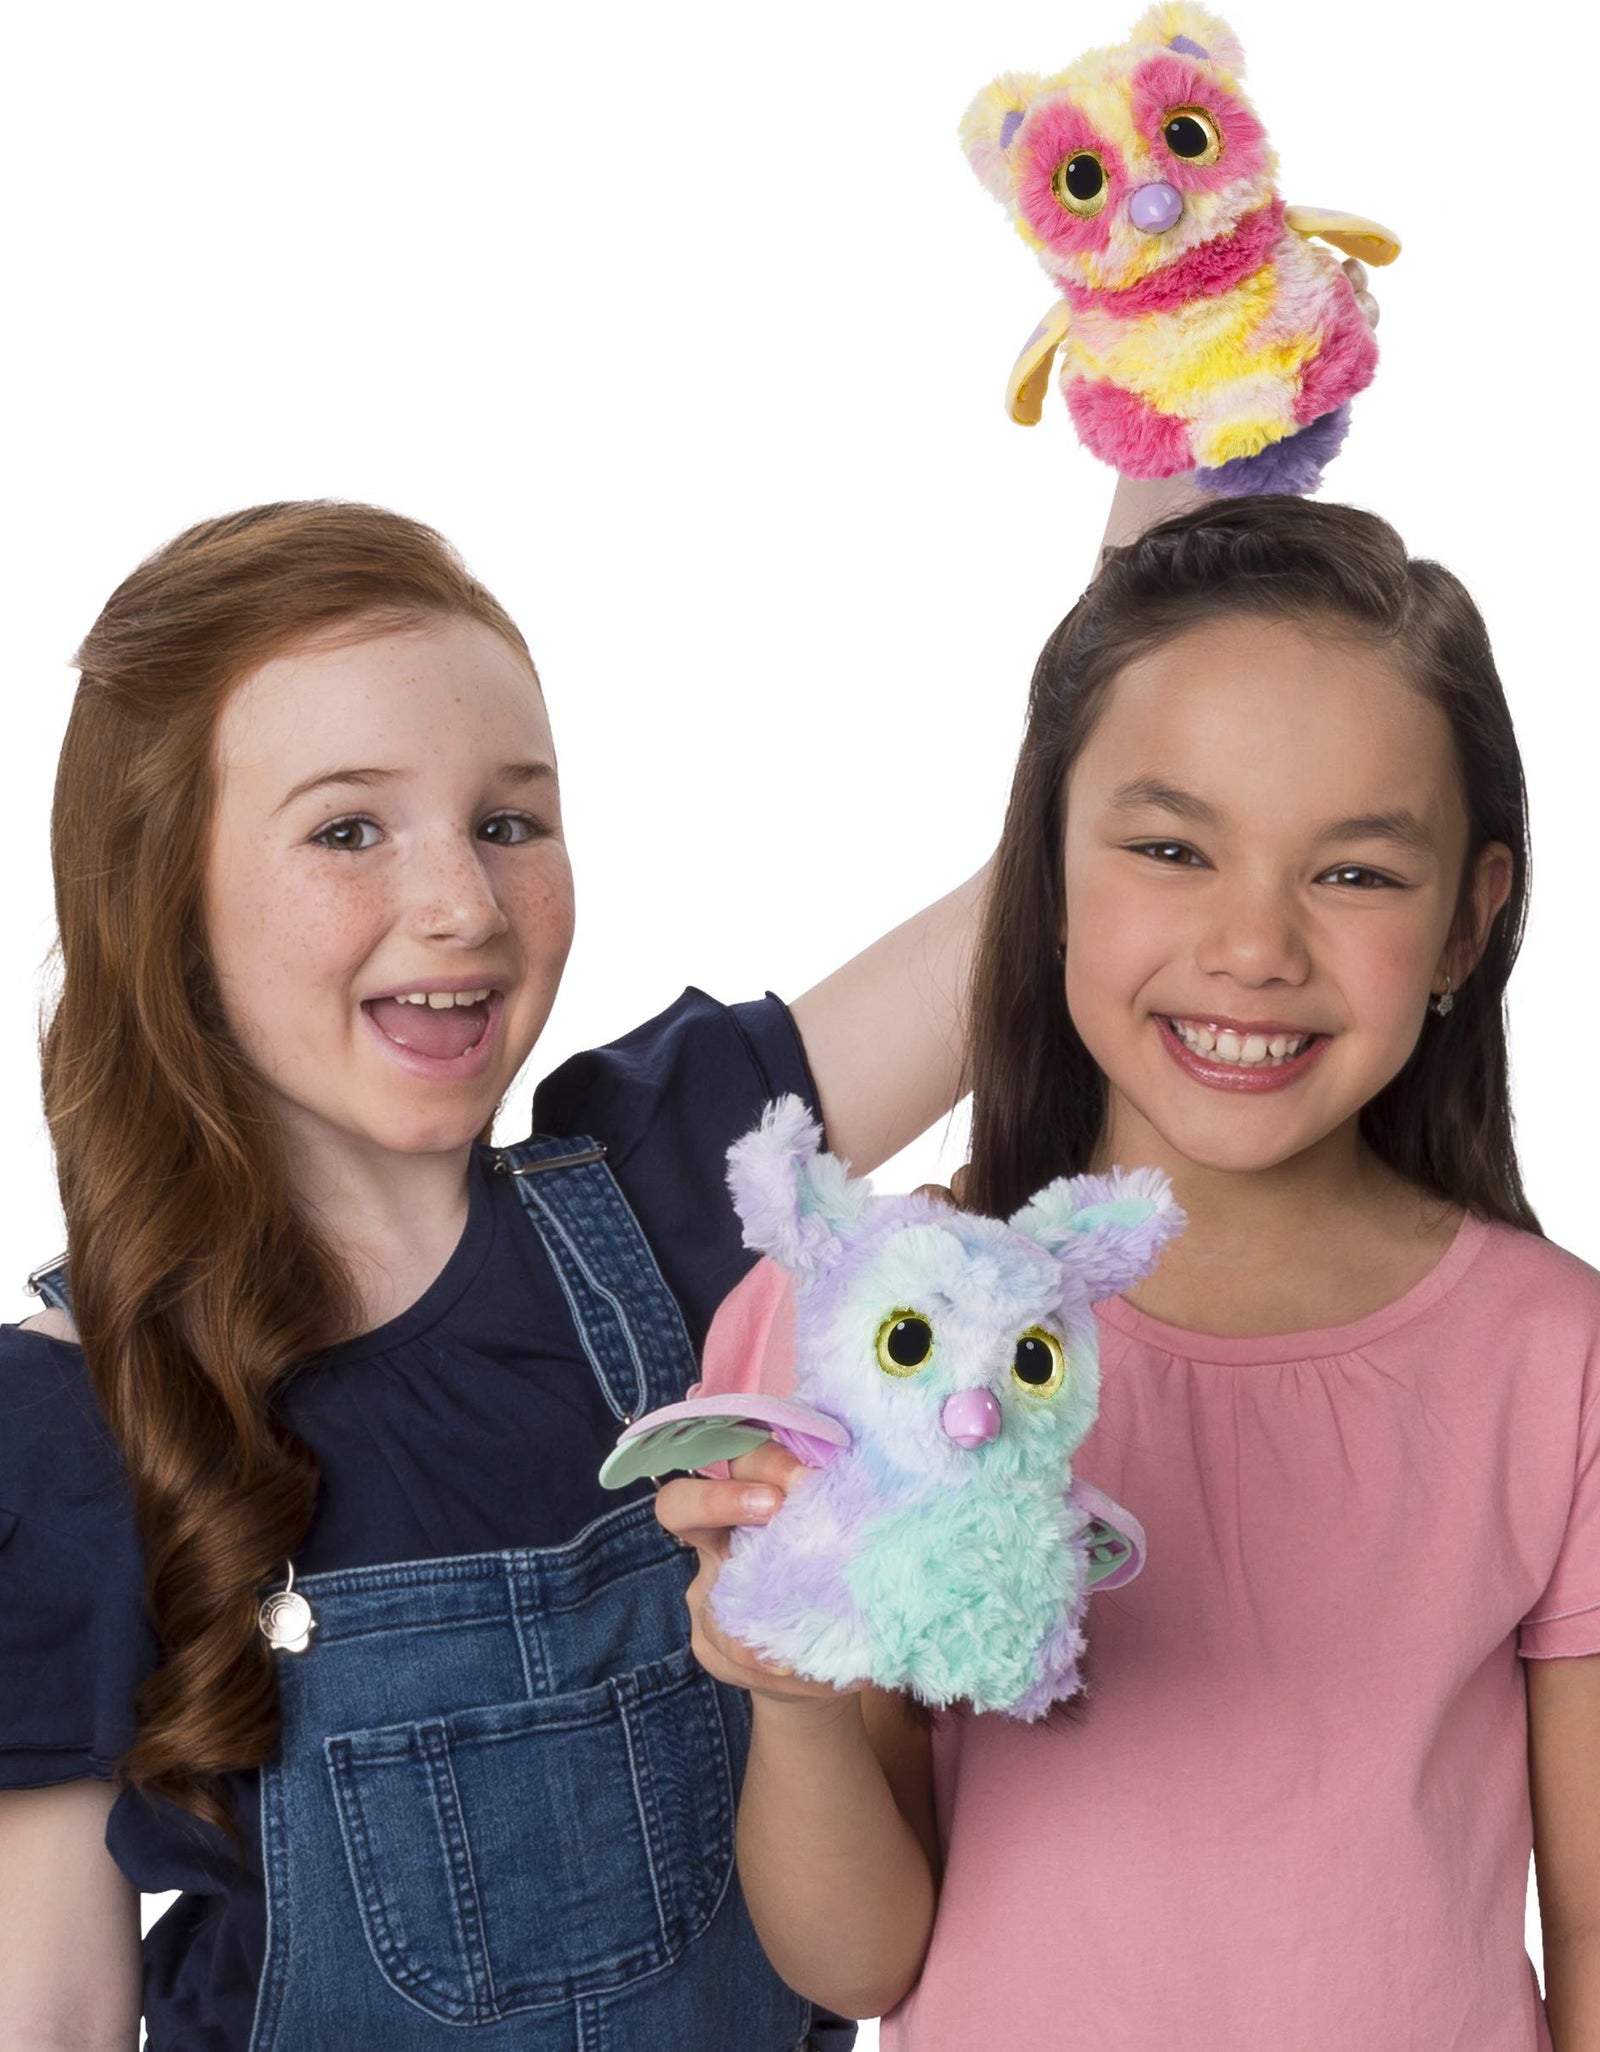 Hatchimals Mystery - Hatch 1 of 4 Fluffy Interactive Mystery Characters from Cloud Cove (Styles May Vary)